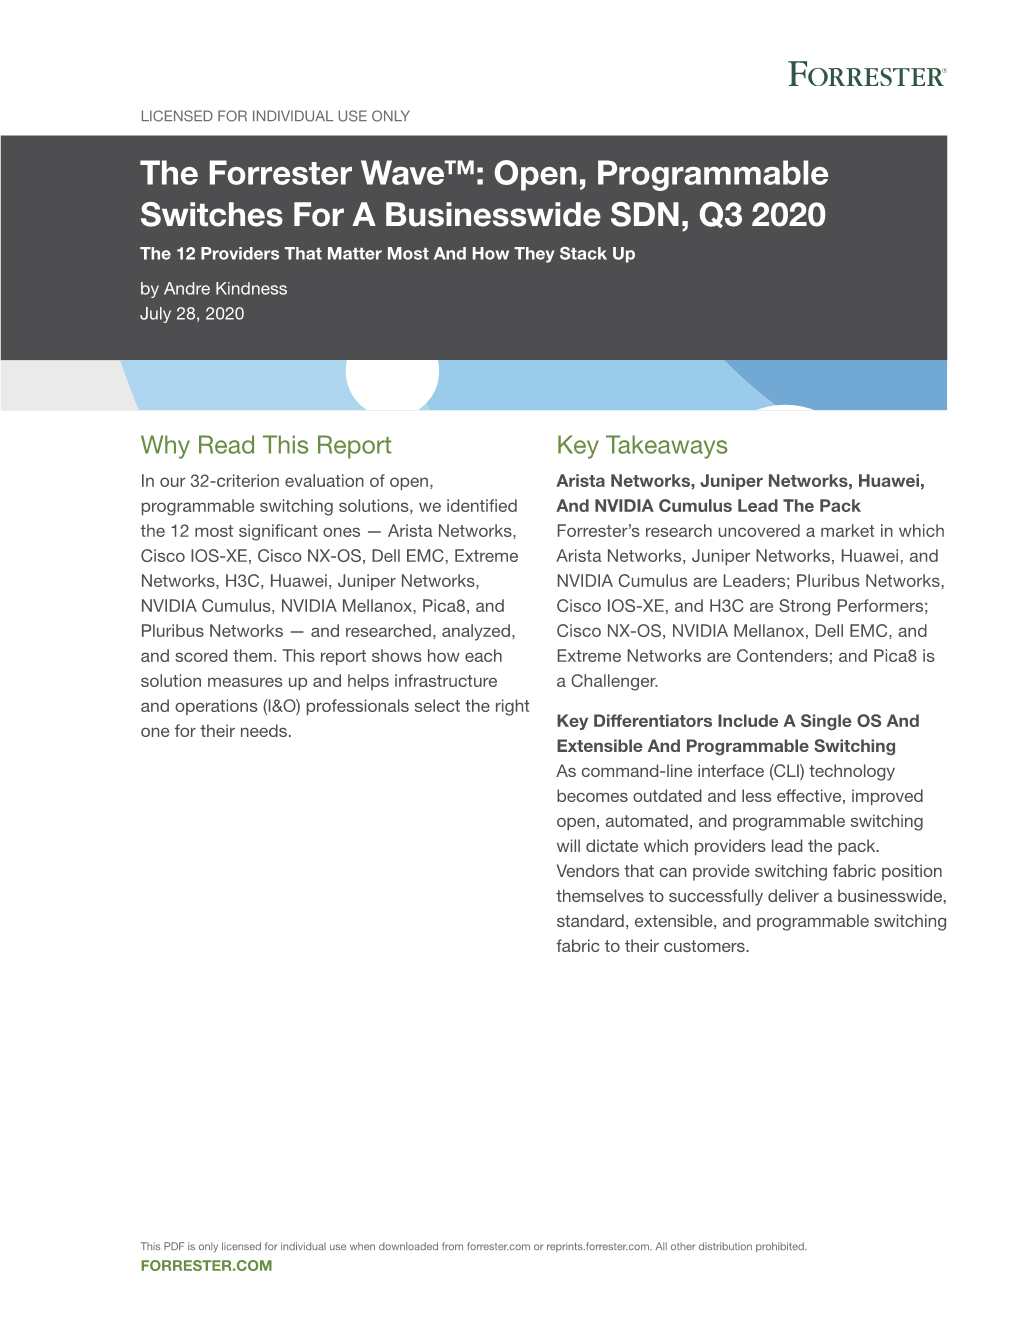 The Forrester Wave™: Open, Programmable Switches for A